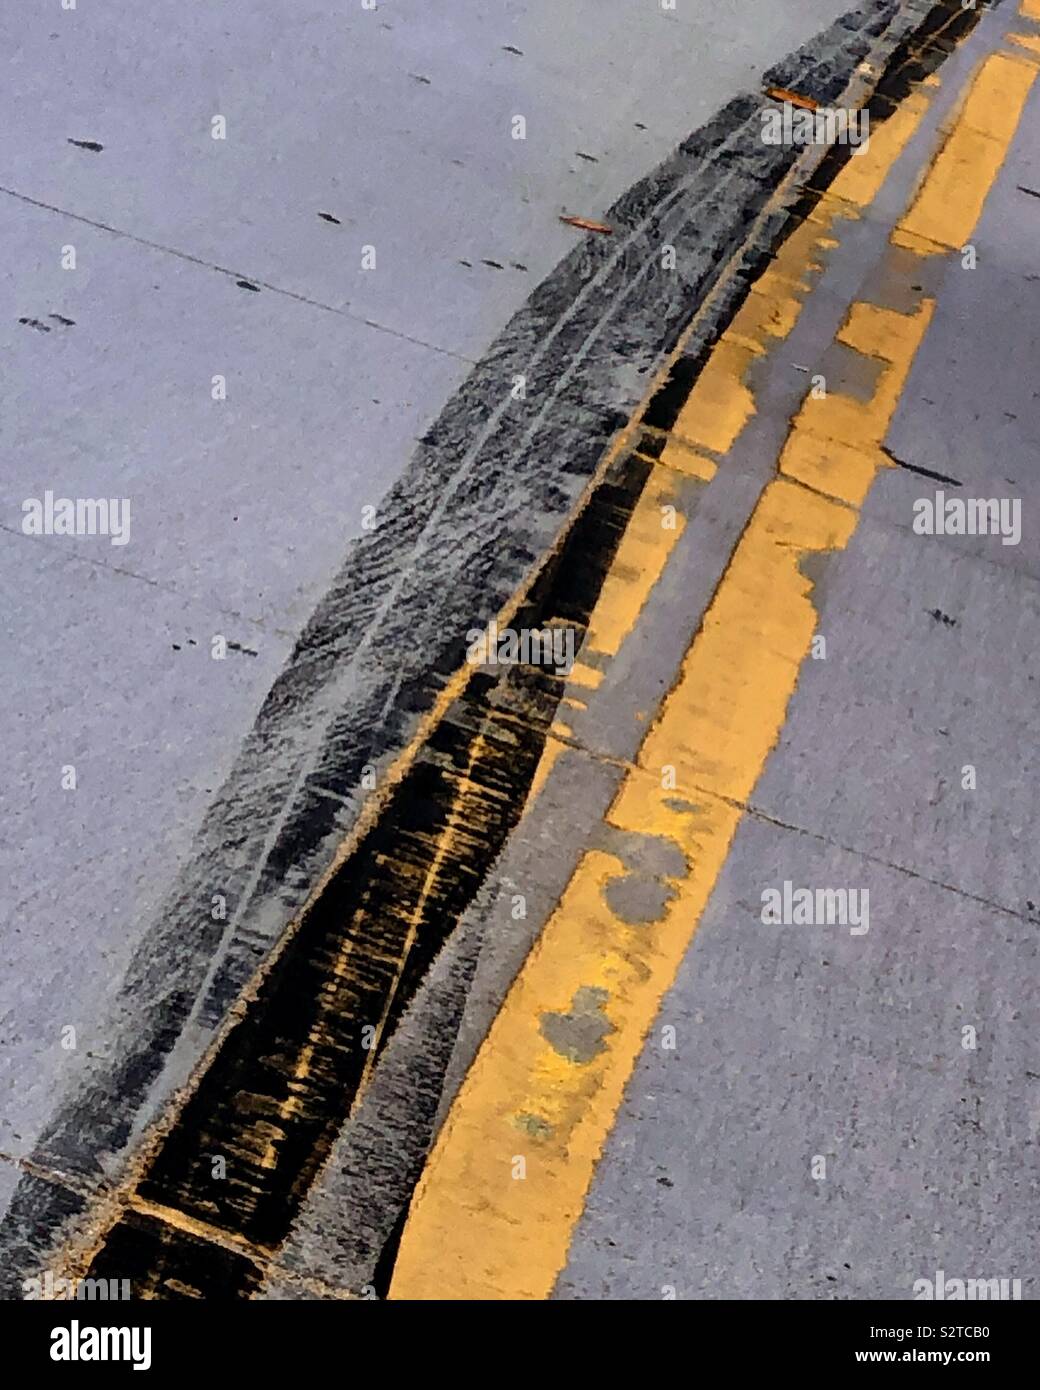 Heavy, panicked skid marks veer across a double yellow line. Stock Photo